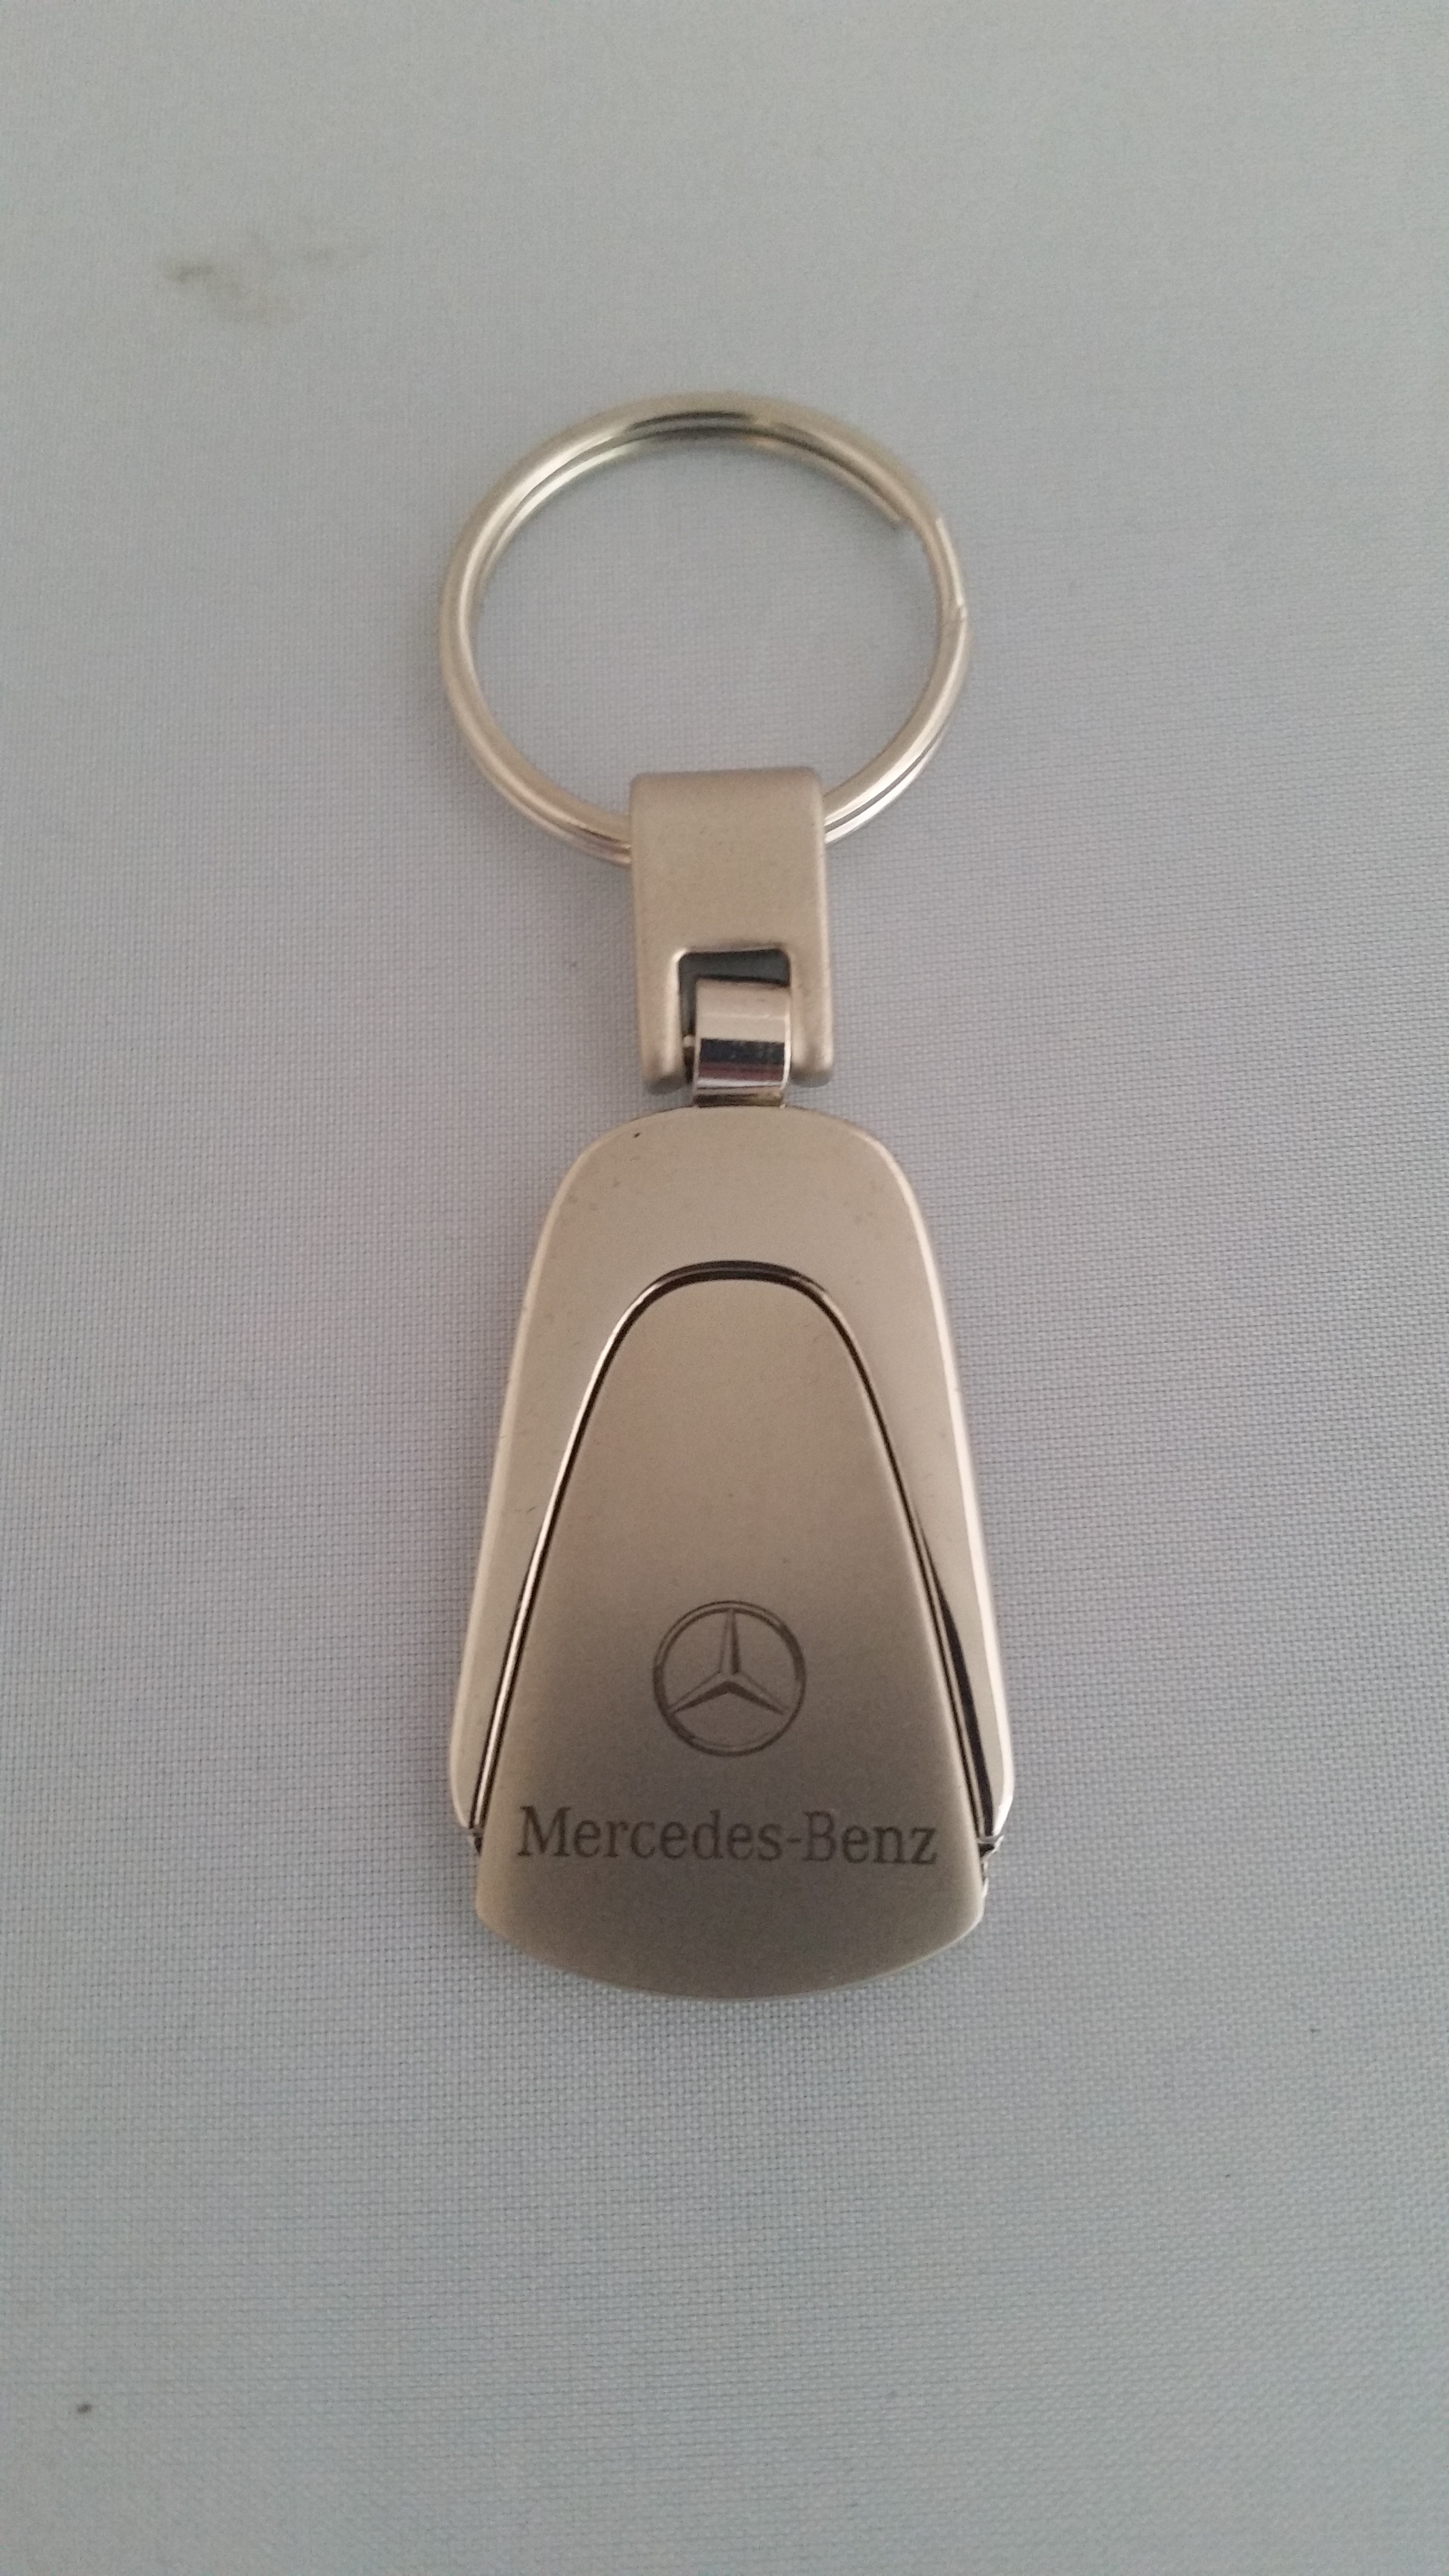 Mercedes Benz Key Chain Silver and Chrome 